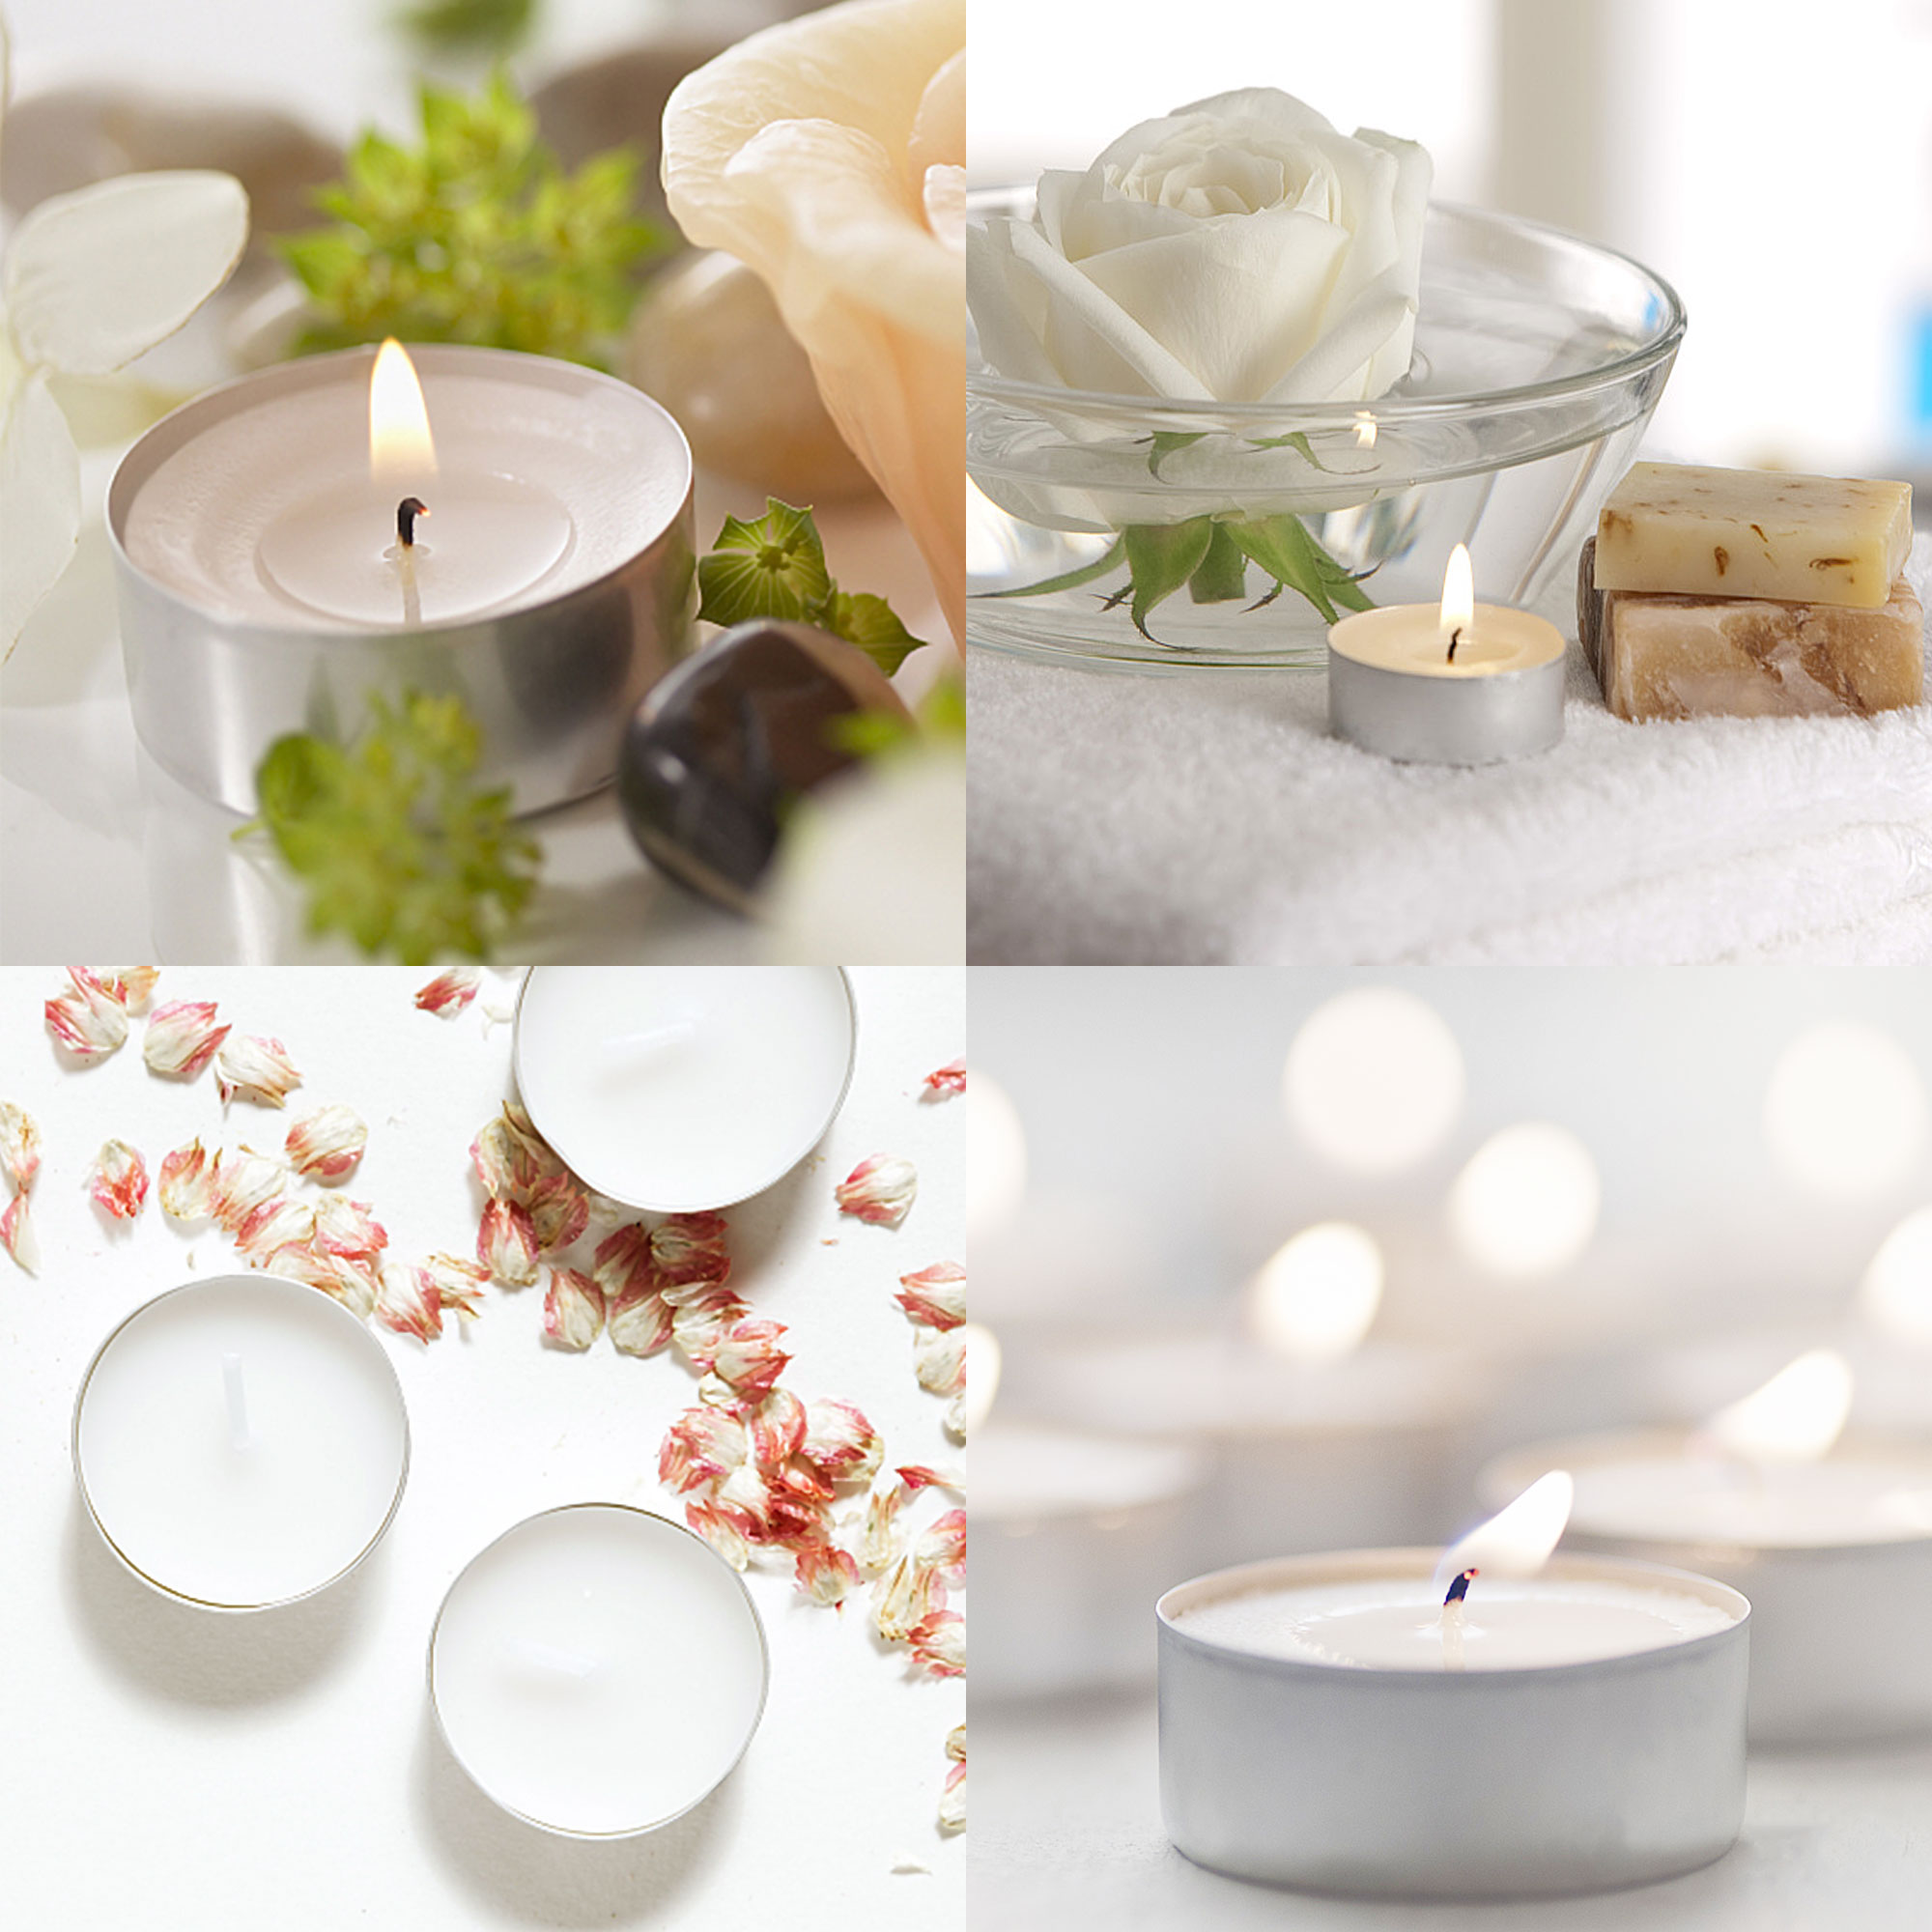 SONSIEN 200pcs Tea Lights Candles in Bulk, Smokeless, Dripless, Long  Lasting Paraffin Tea Candles, Small Votive Mini Tealight Soy Wax Candles,  White